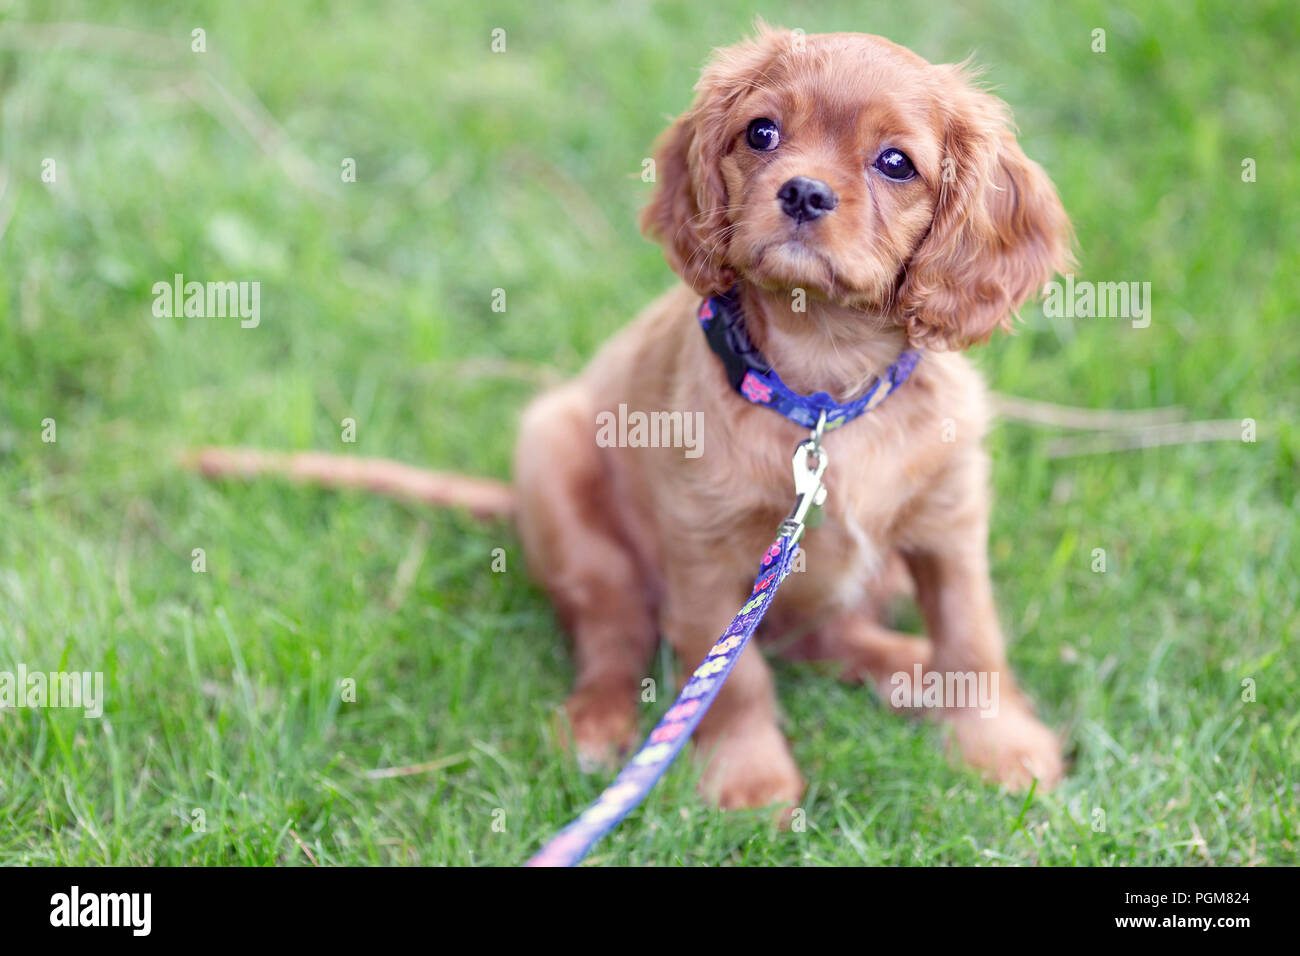 Cute puppy on the leash sitting on the grass Stock Photo